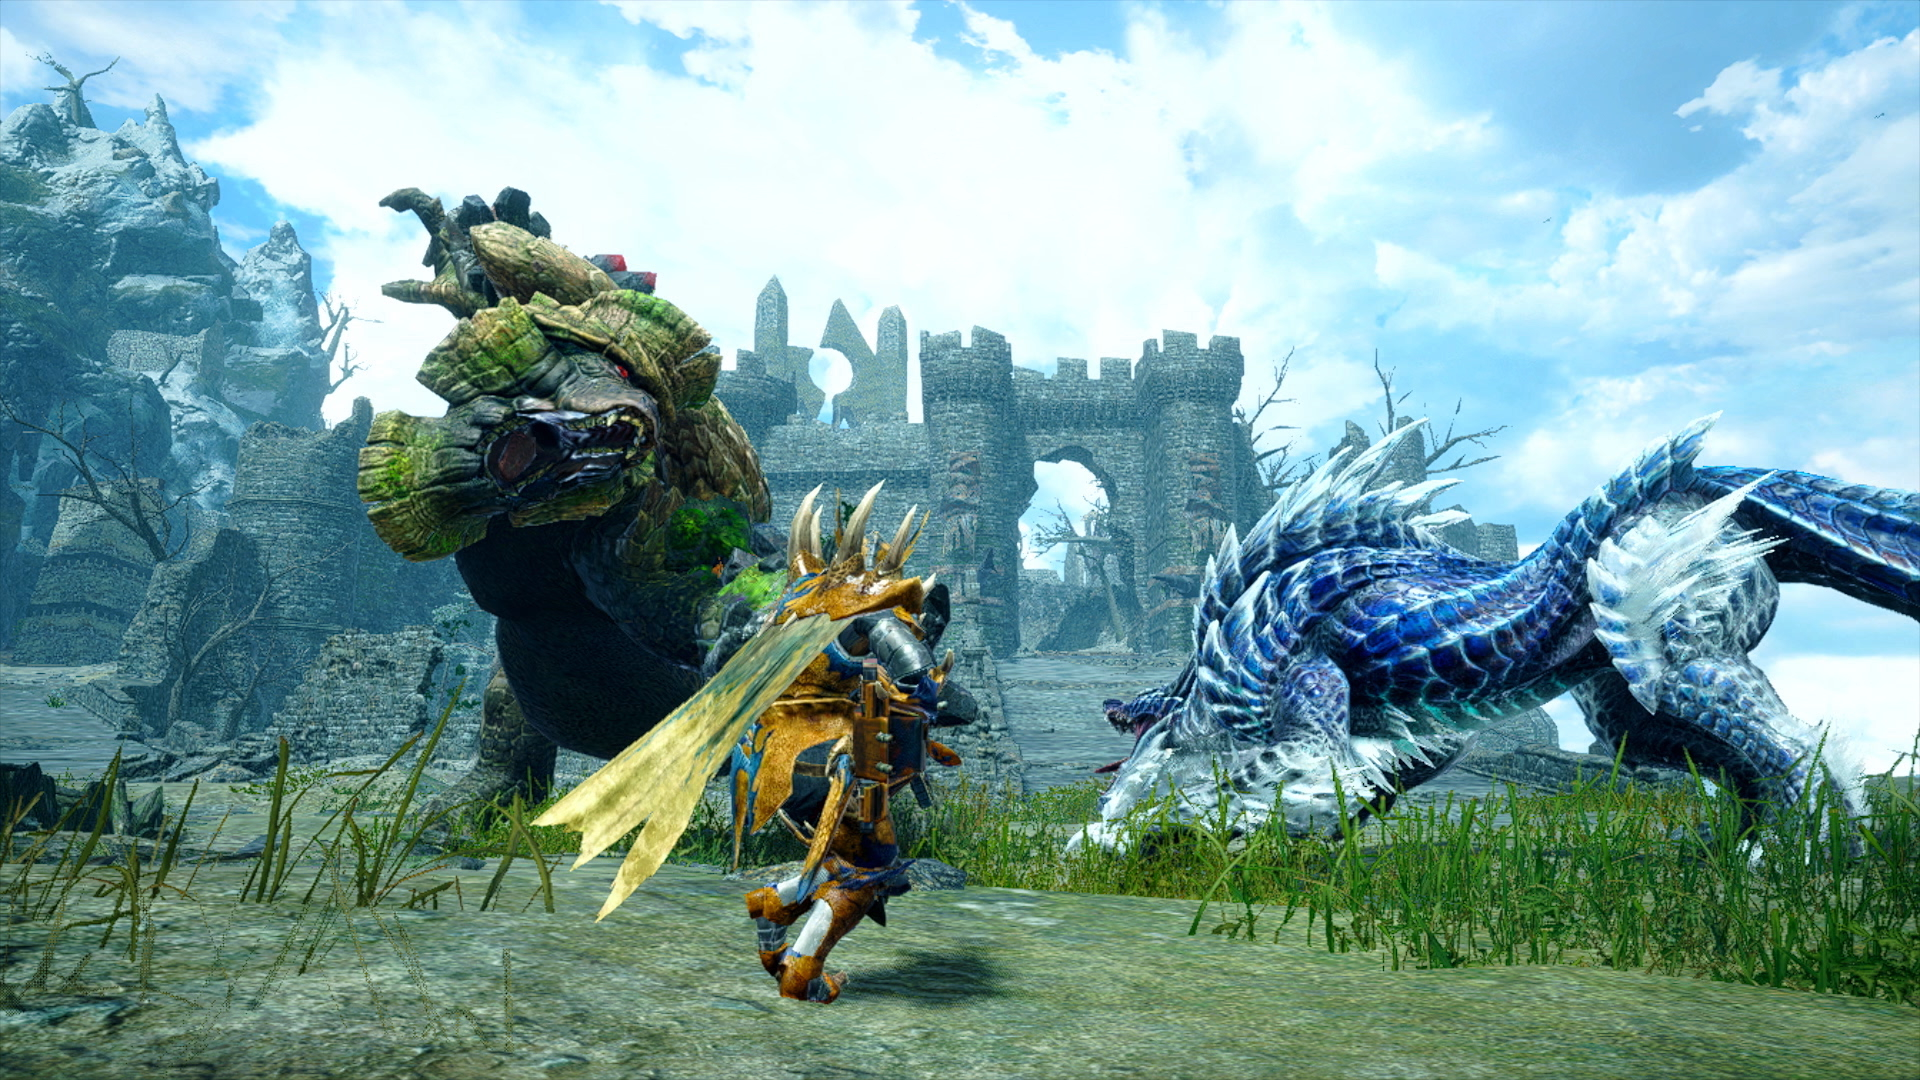 Monster Hunter on X: Hunters! A new quest rank, “Master Rank